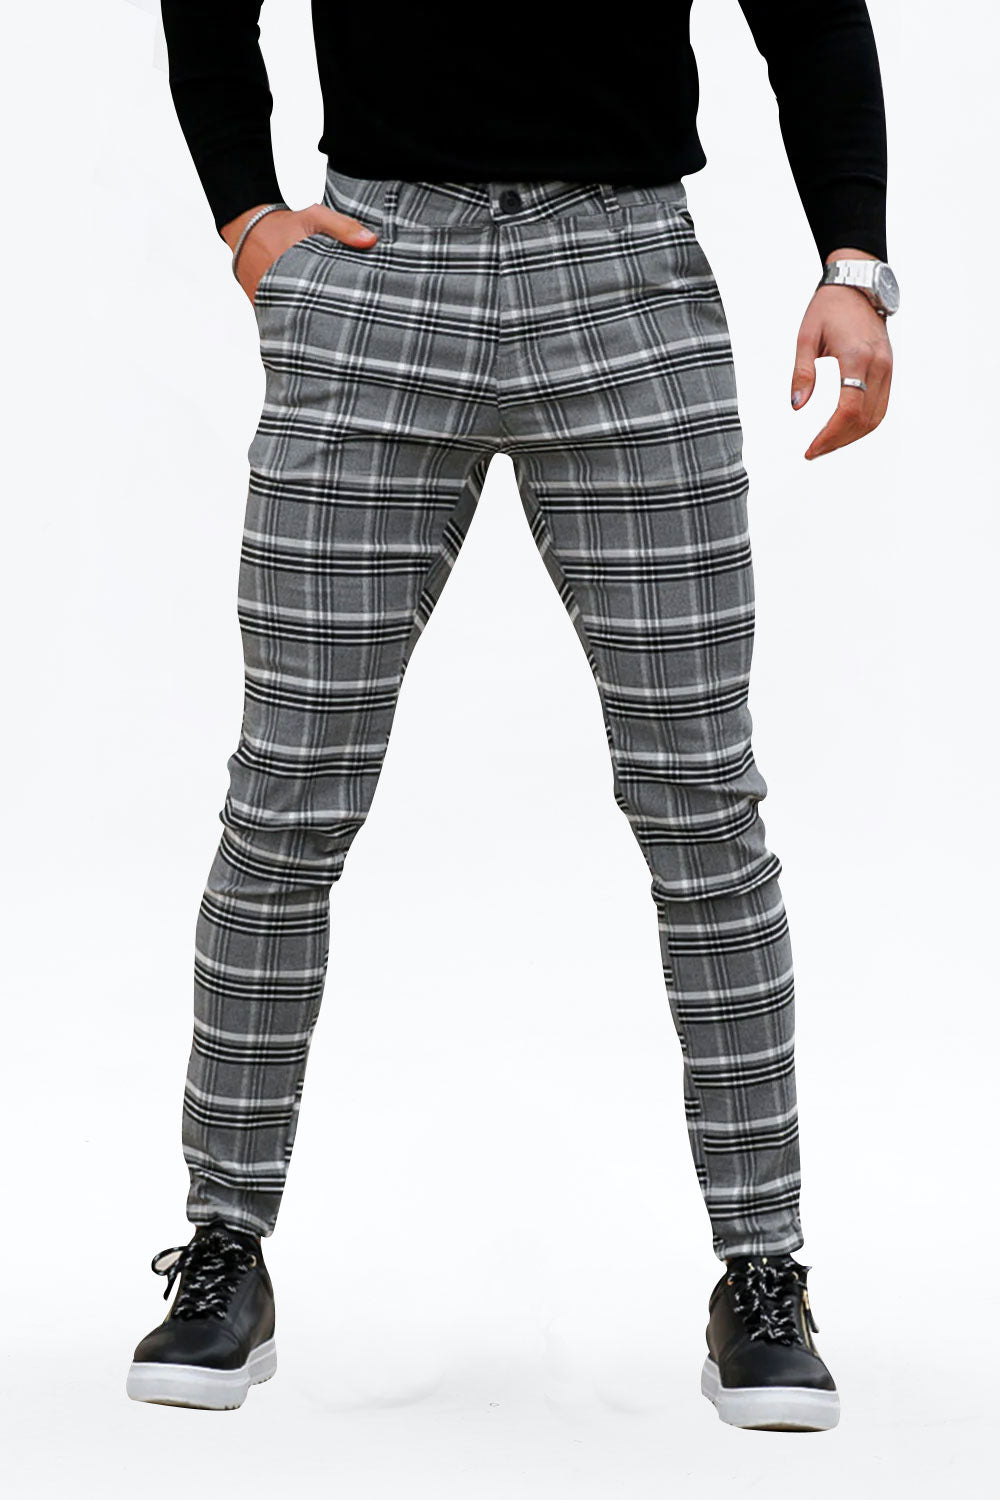 Gingtto Mens Stretch Plaid Dark Grey Chinos Pants For Every Occasion